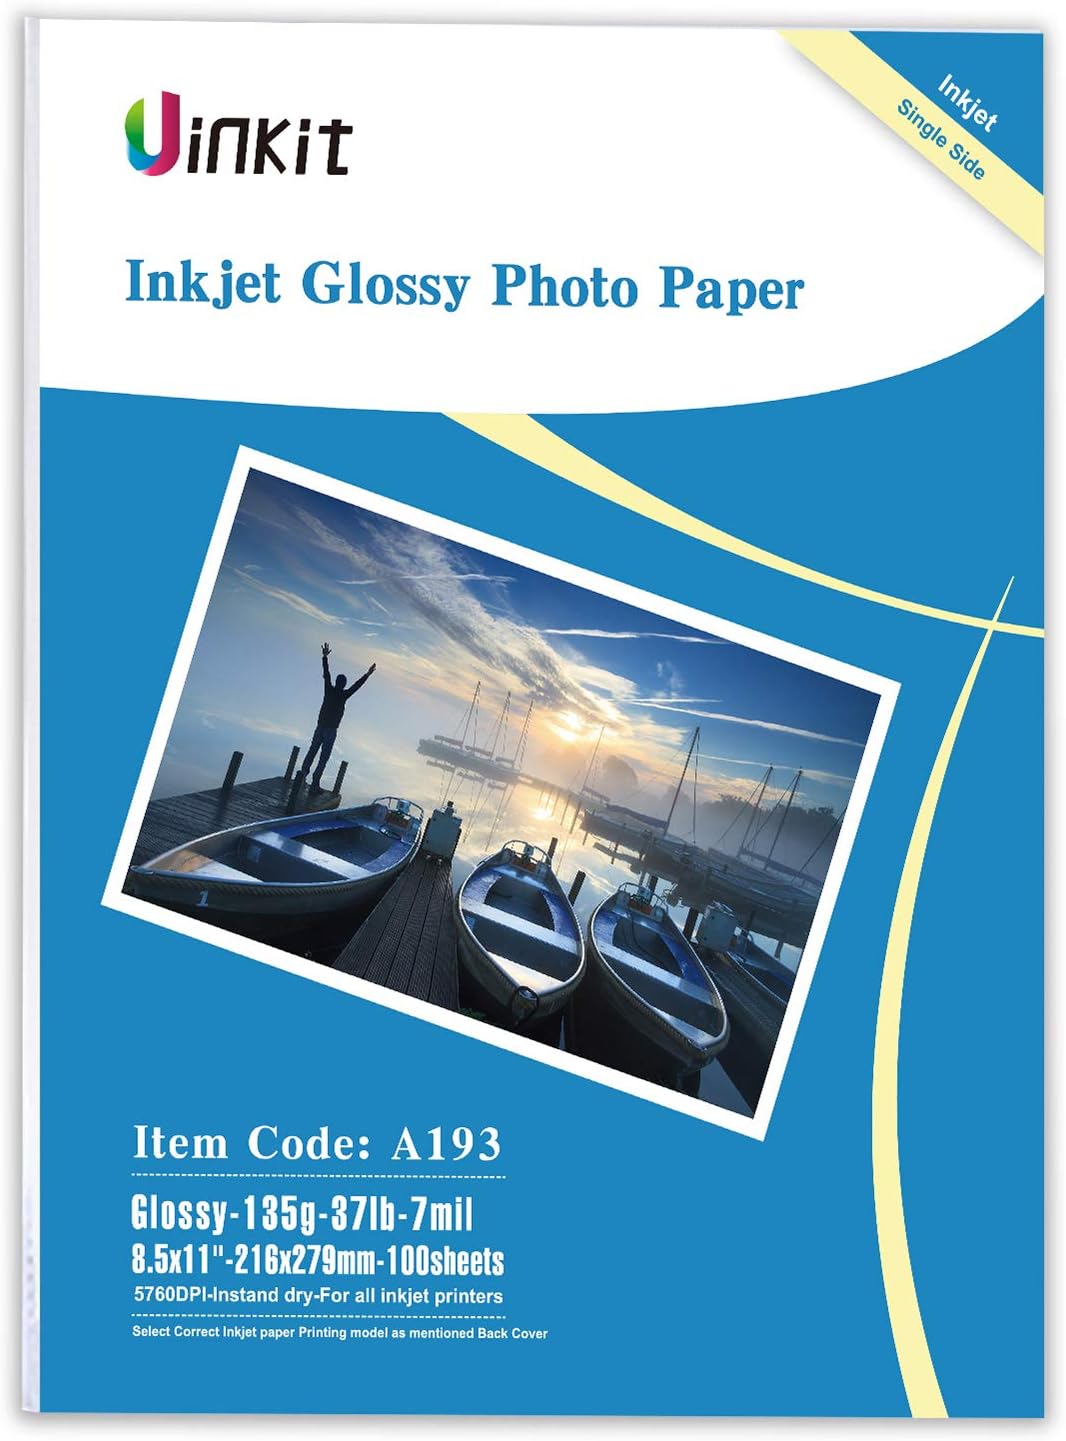 printer for glossy flyers review